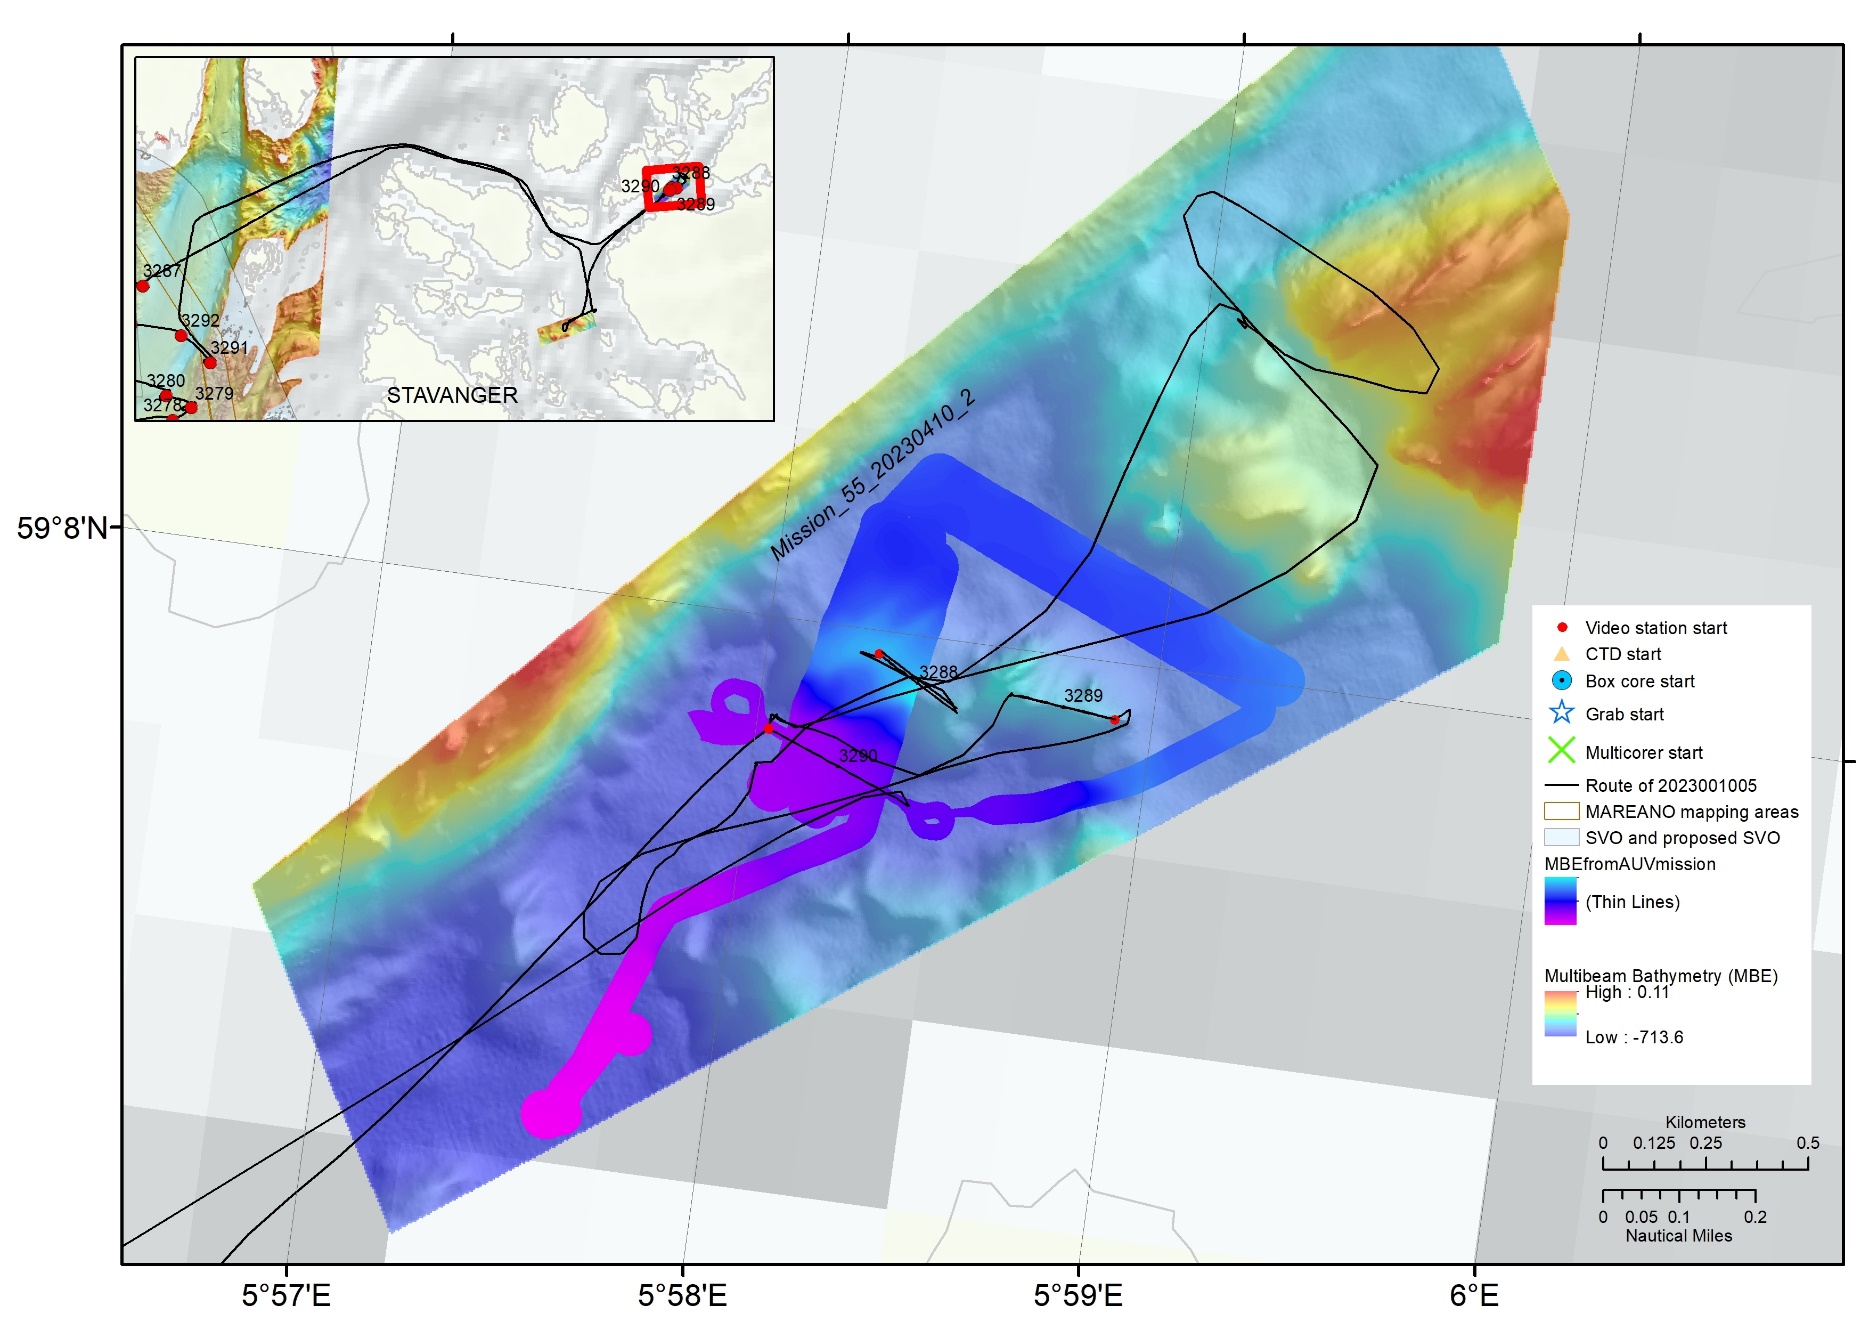 Zoom in on the Fgnafjorden area of the map showing the zigzagging route of the cruise overlapping the multibeam data with stations labelled with R numers and symbols showing what type of data was collected there.